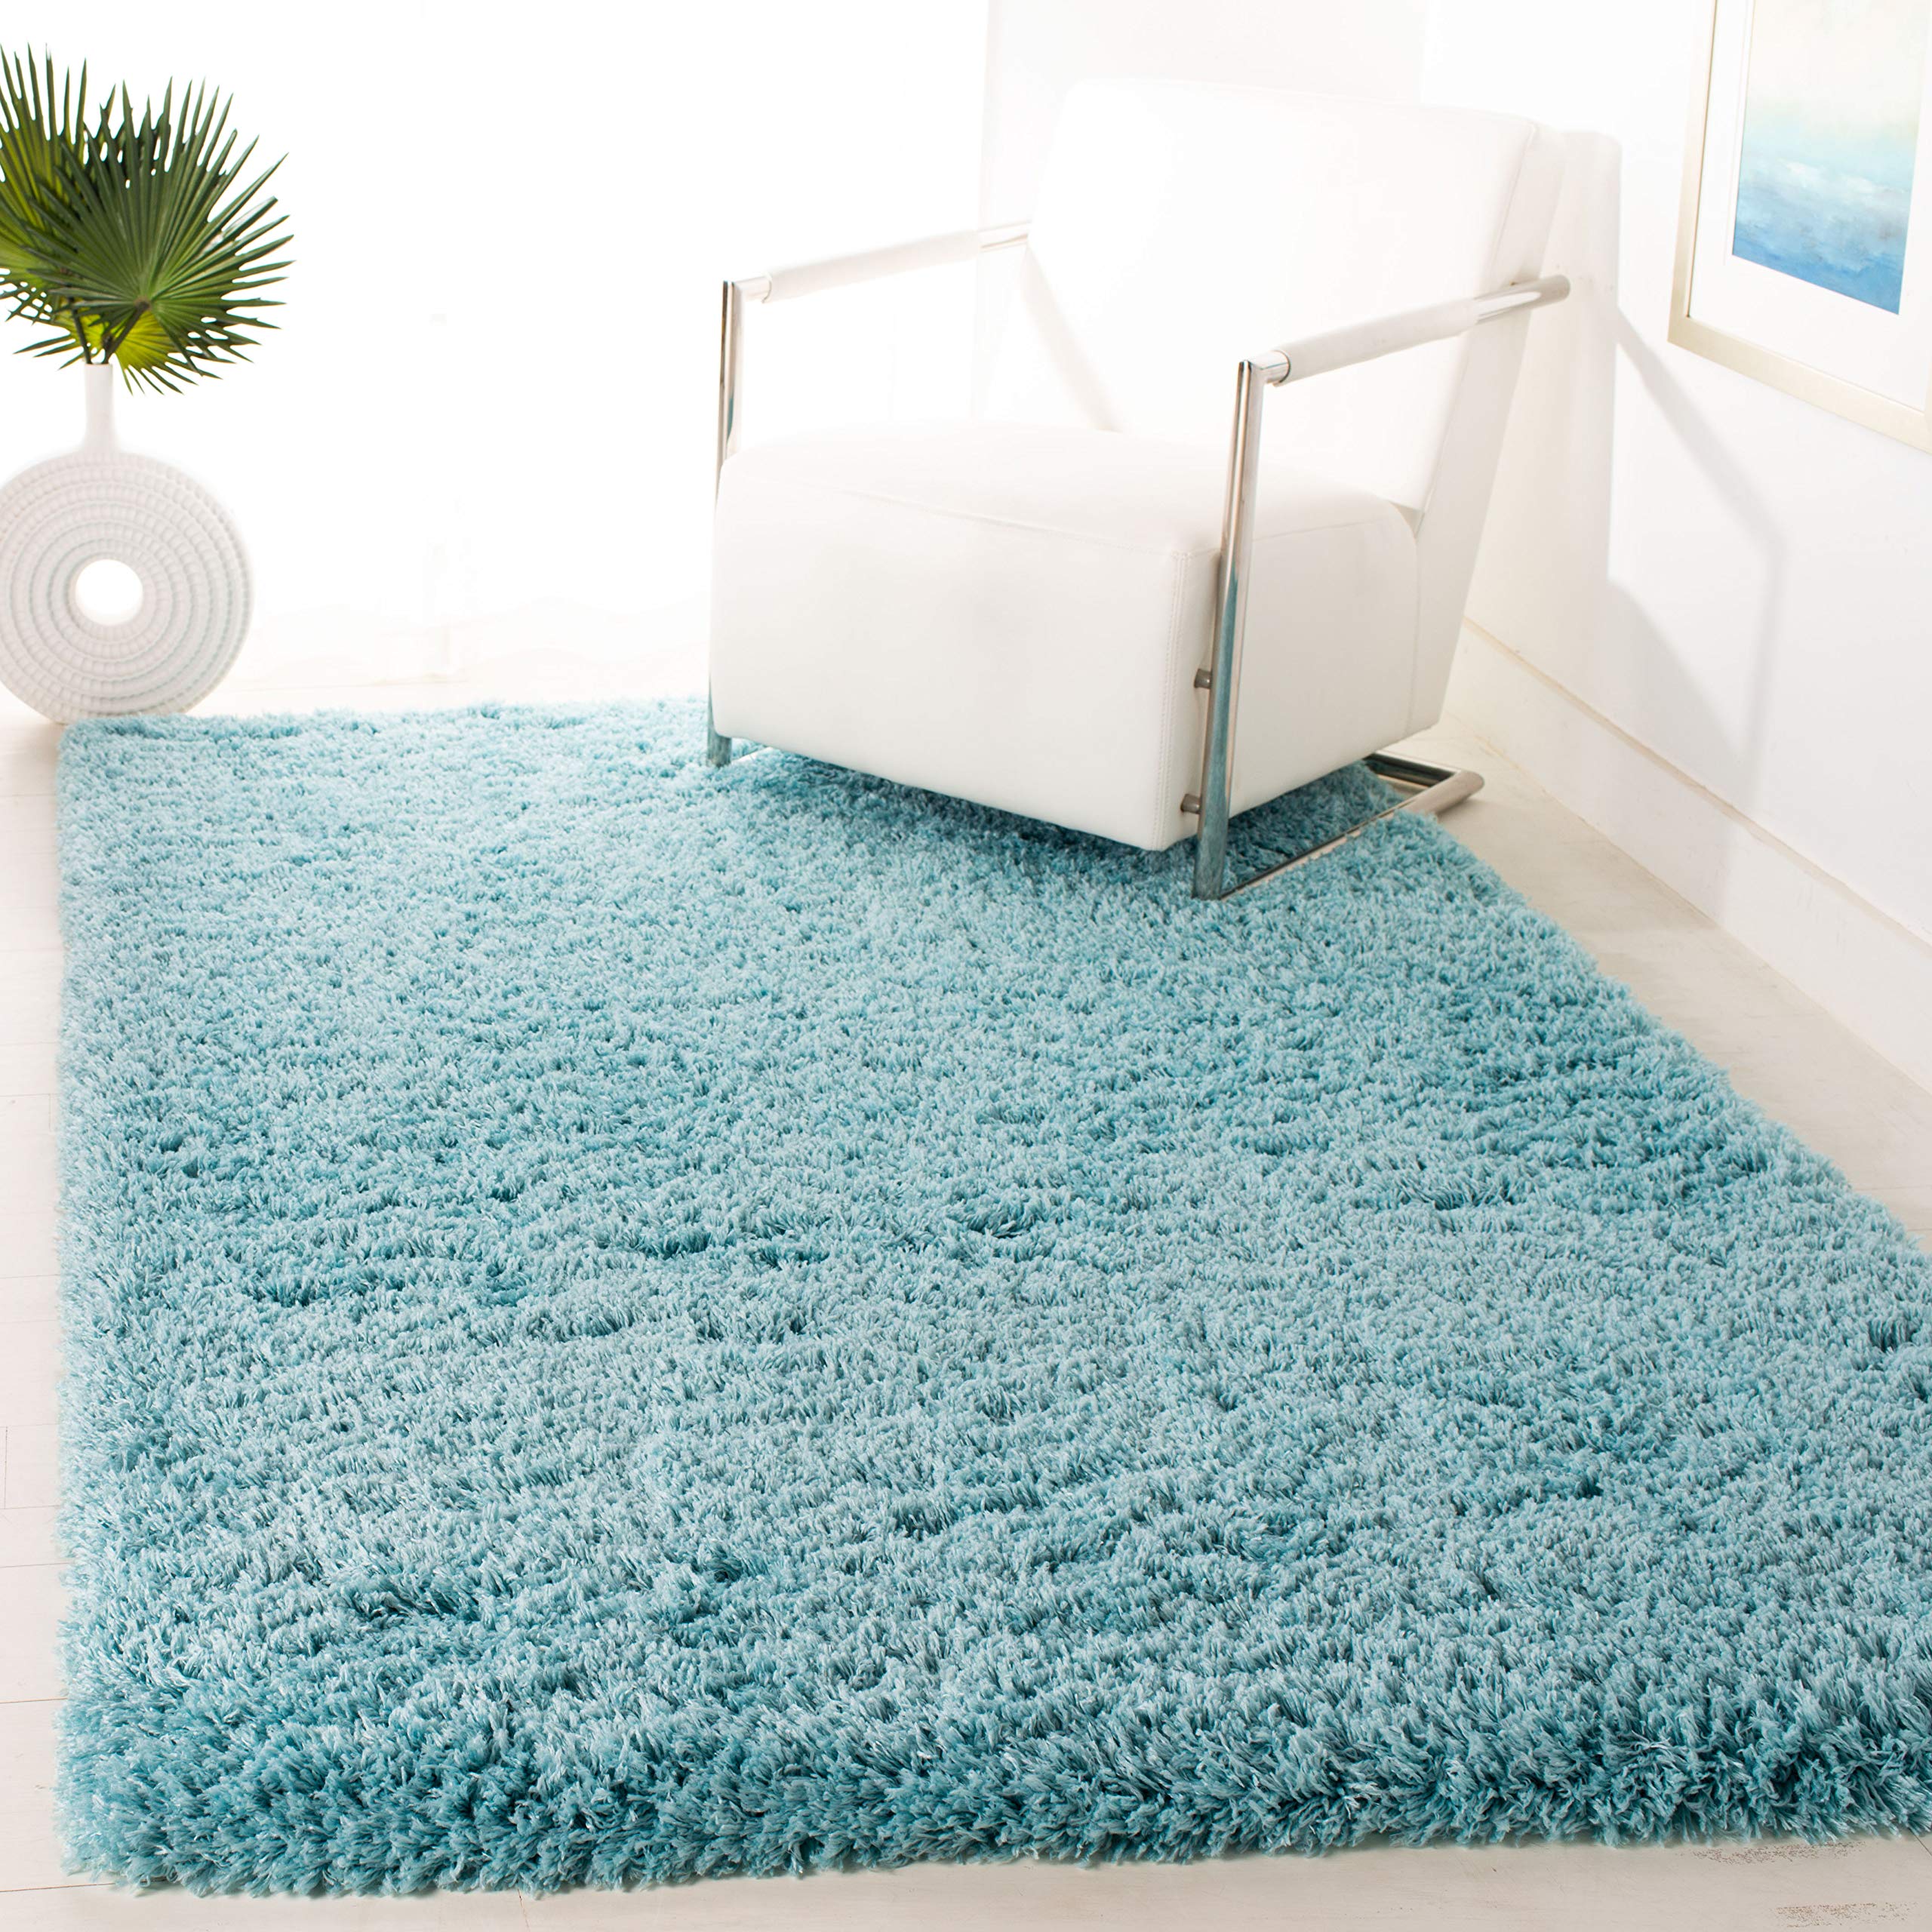 Safavieh Polar Shag Collection Accent Rug - 4' x 6', Light Turquoise, Solid Glam Design, Non-Shedding & Easy Care, 3-inch Thick Ideal for High Traffic Areas in Entryway, Living Room, Bedroom (PSG800T)